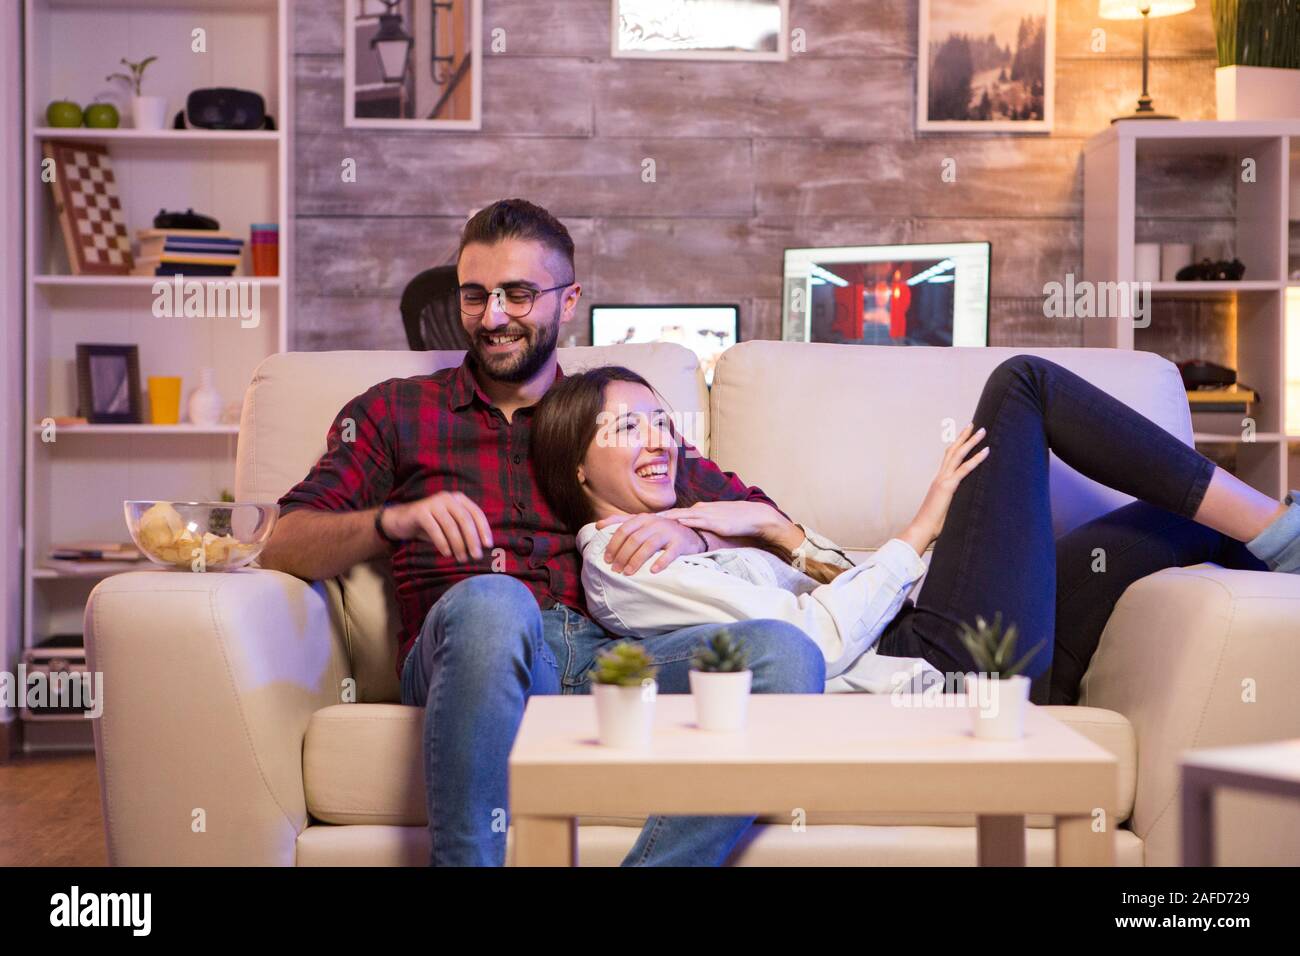 Cheerful young couple laughing while watching a tv show on tv at night. Couple sitting on sofa. Stock Photo